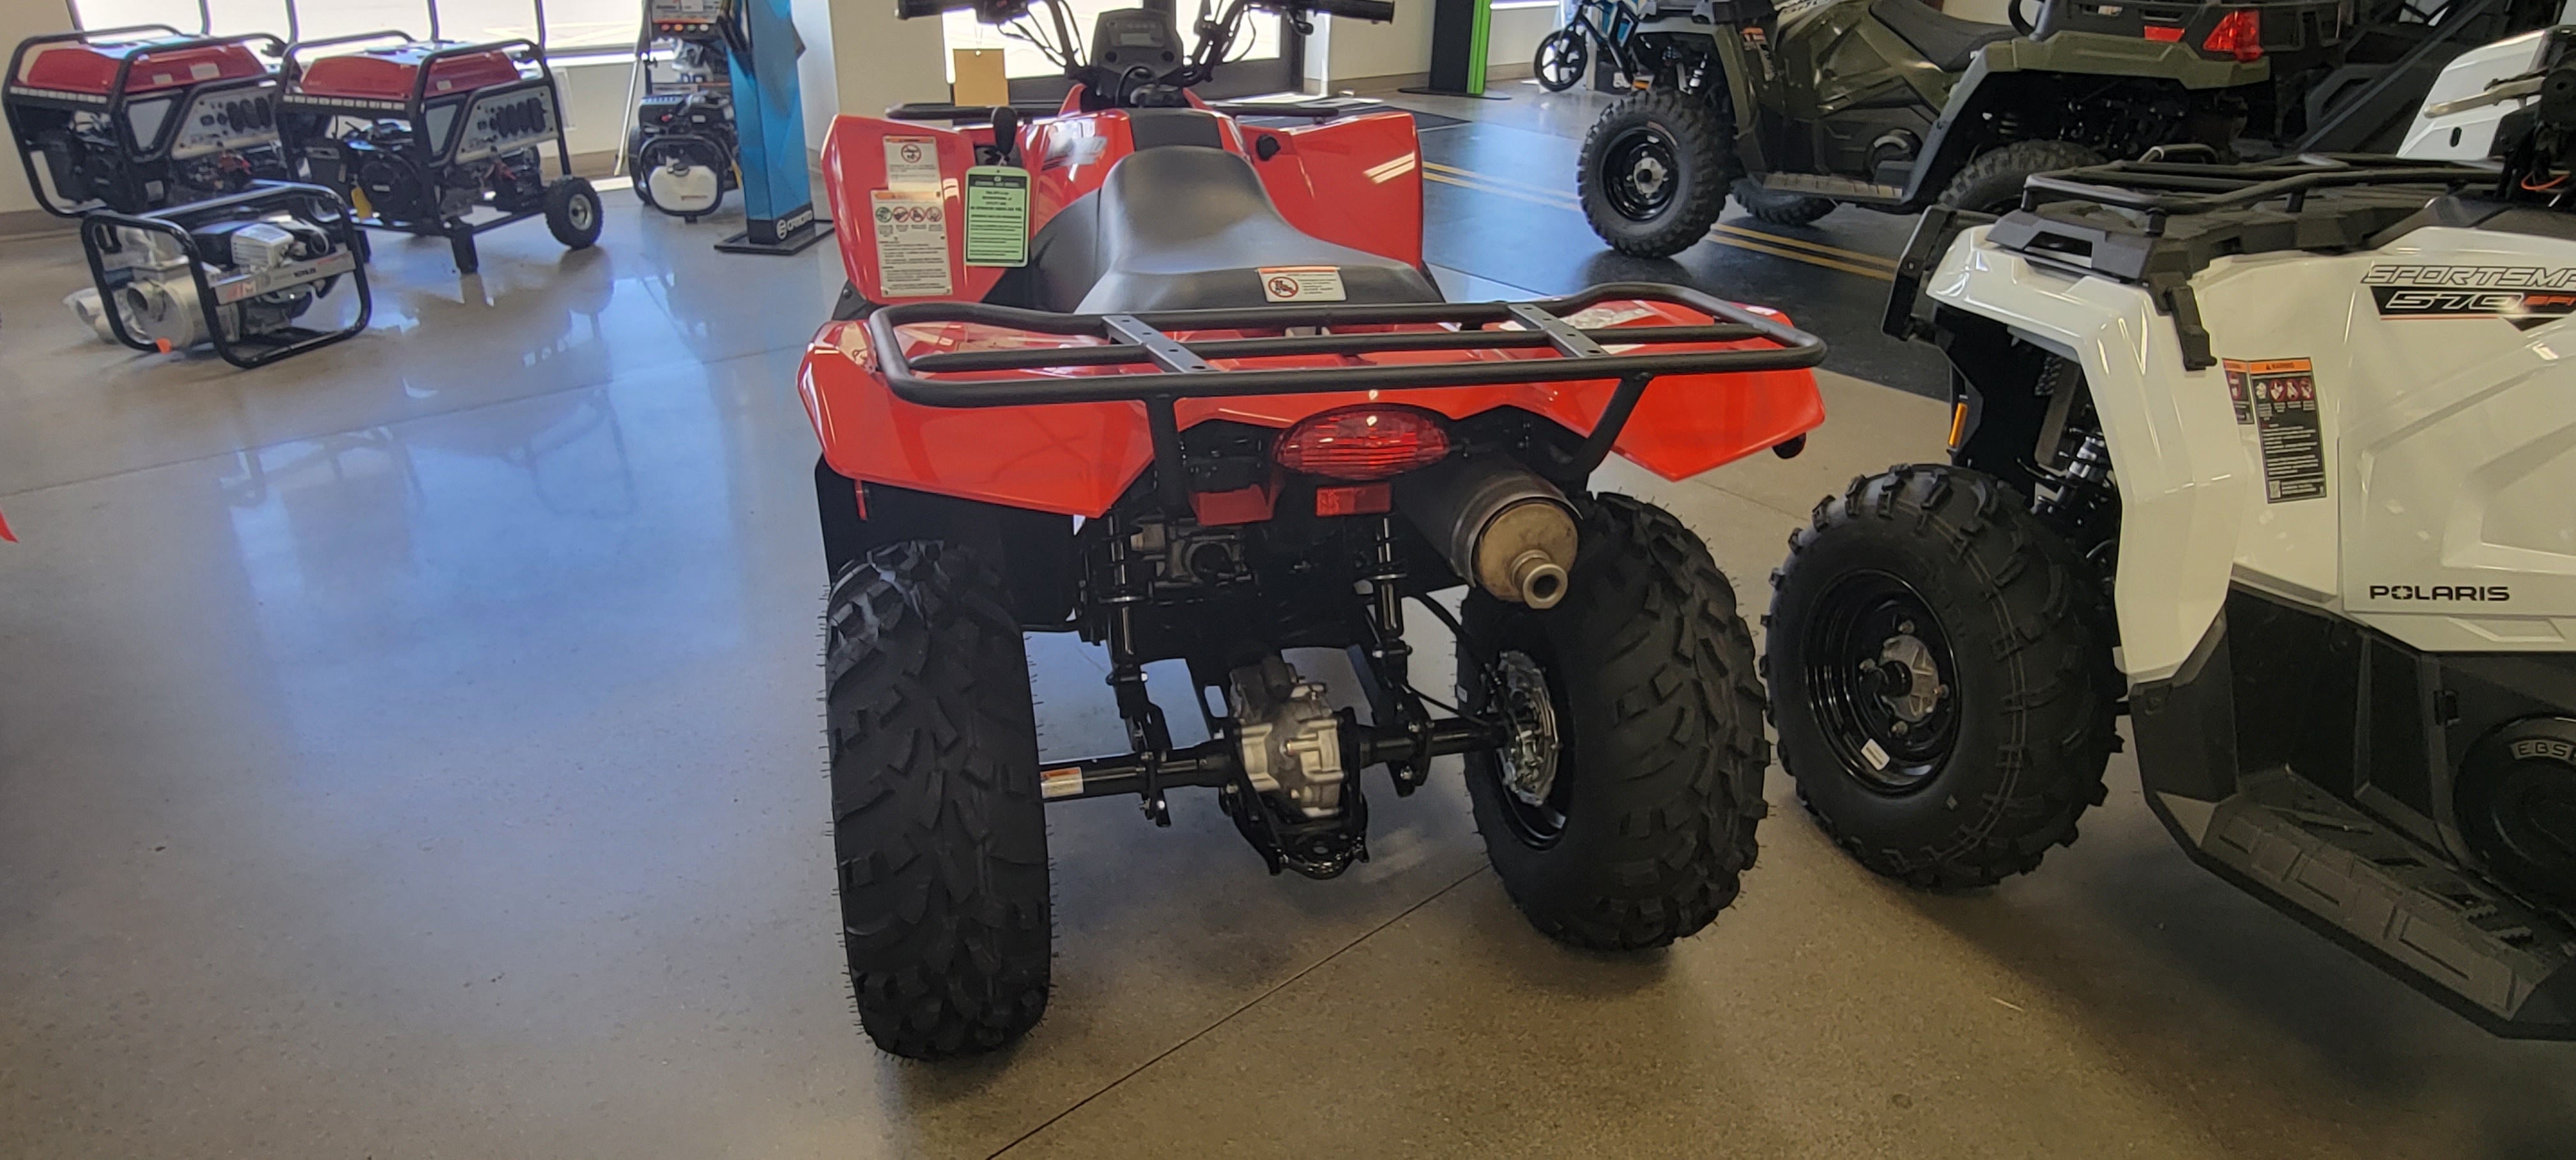 2022 Suzuki KingQuad 400 ASi at Brenny's Motorcycle Clinic, Bettendorf, IA 52722